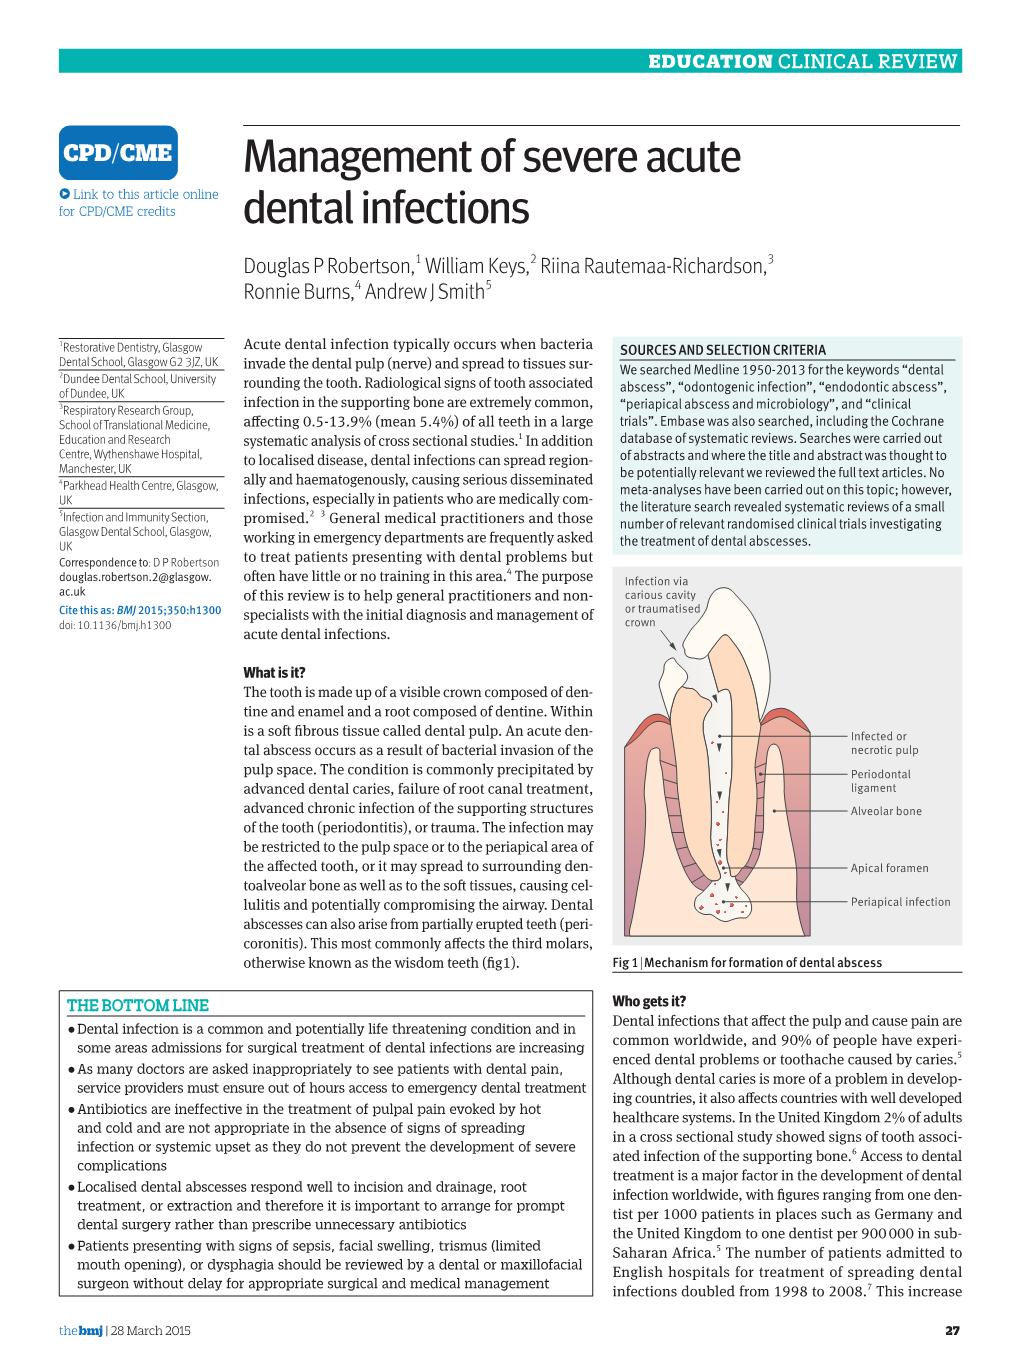 Management of Severe Acute Dental Infections